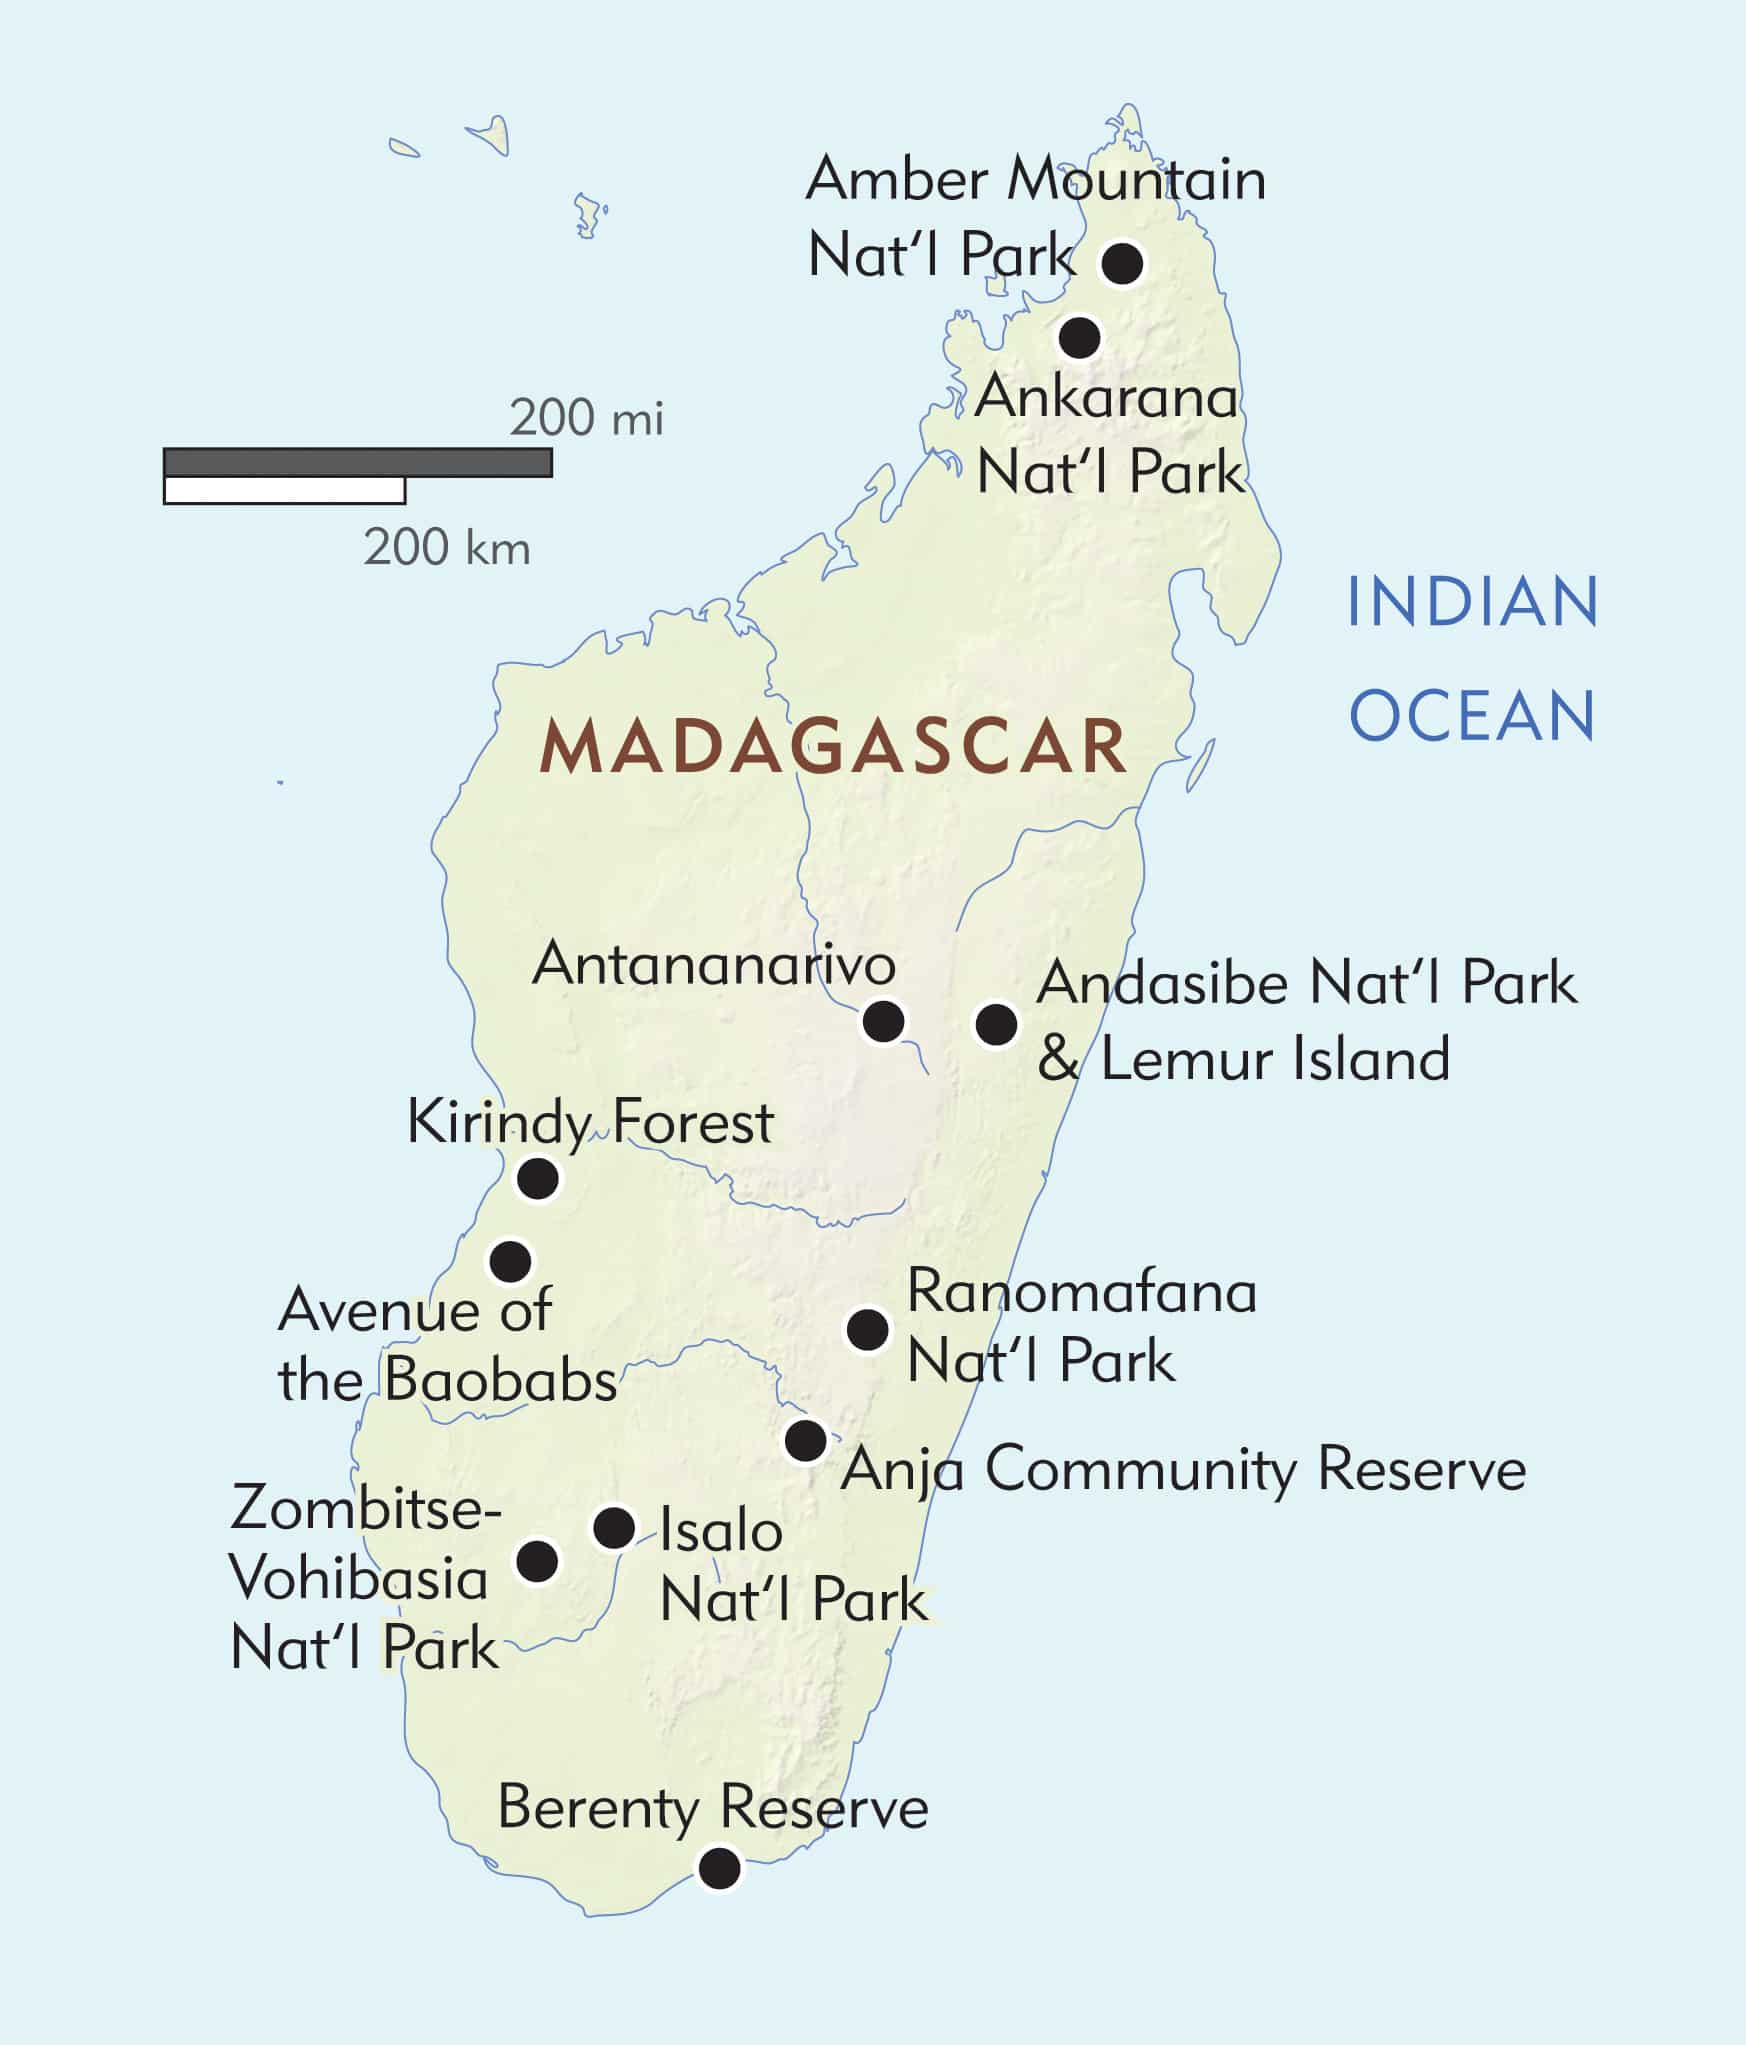 Top 10 National Parks and Reserves in Madagascar